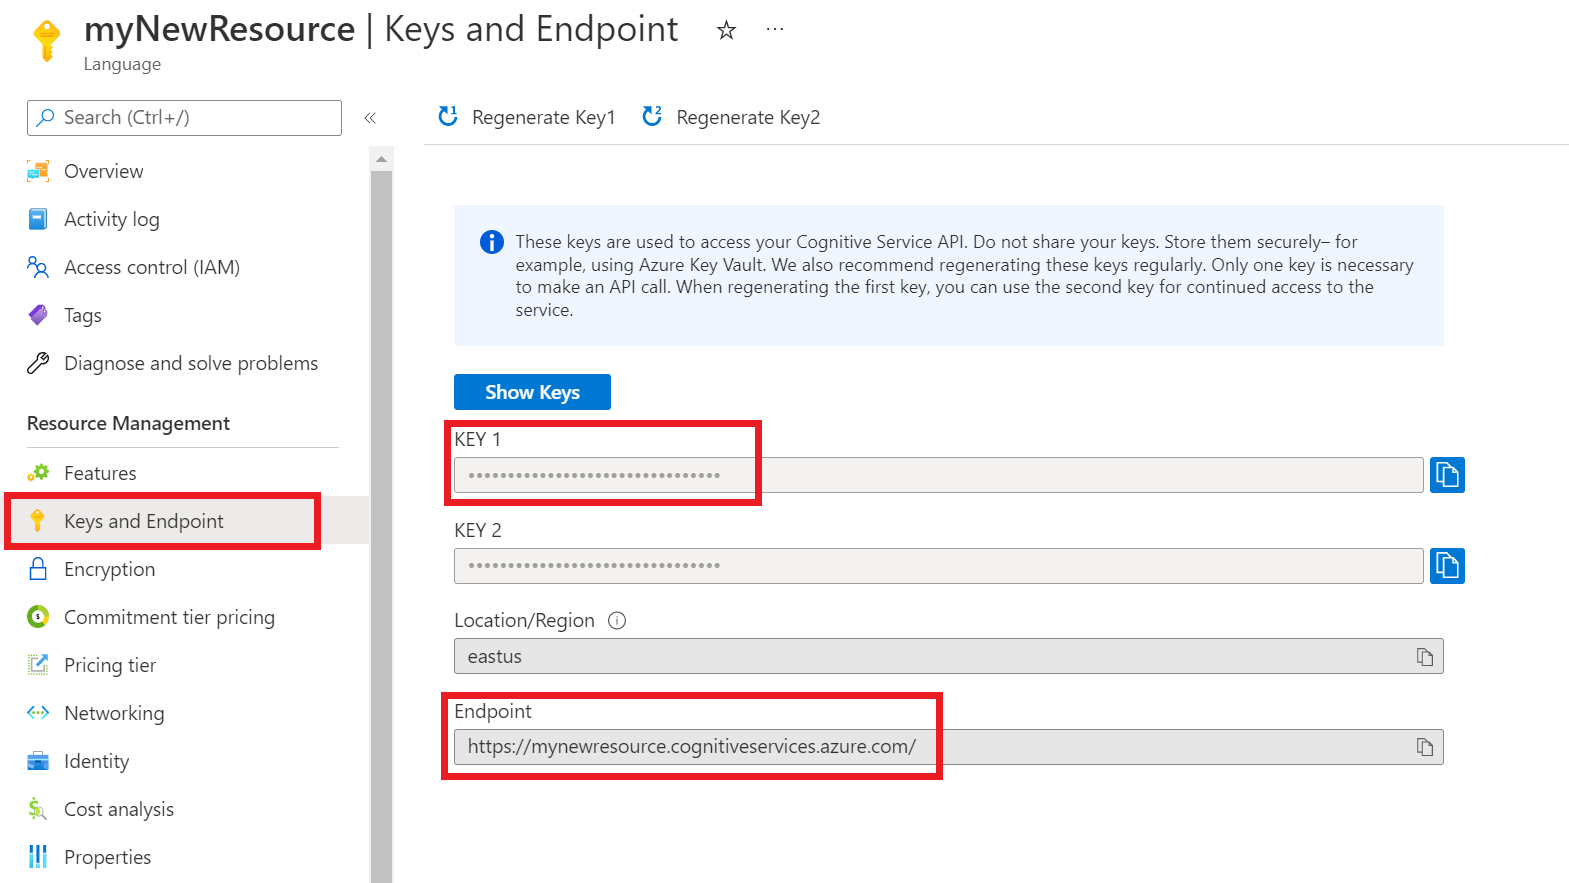 A screenshot showing the key and endpoint page in the Azure portal